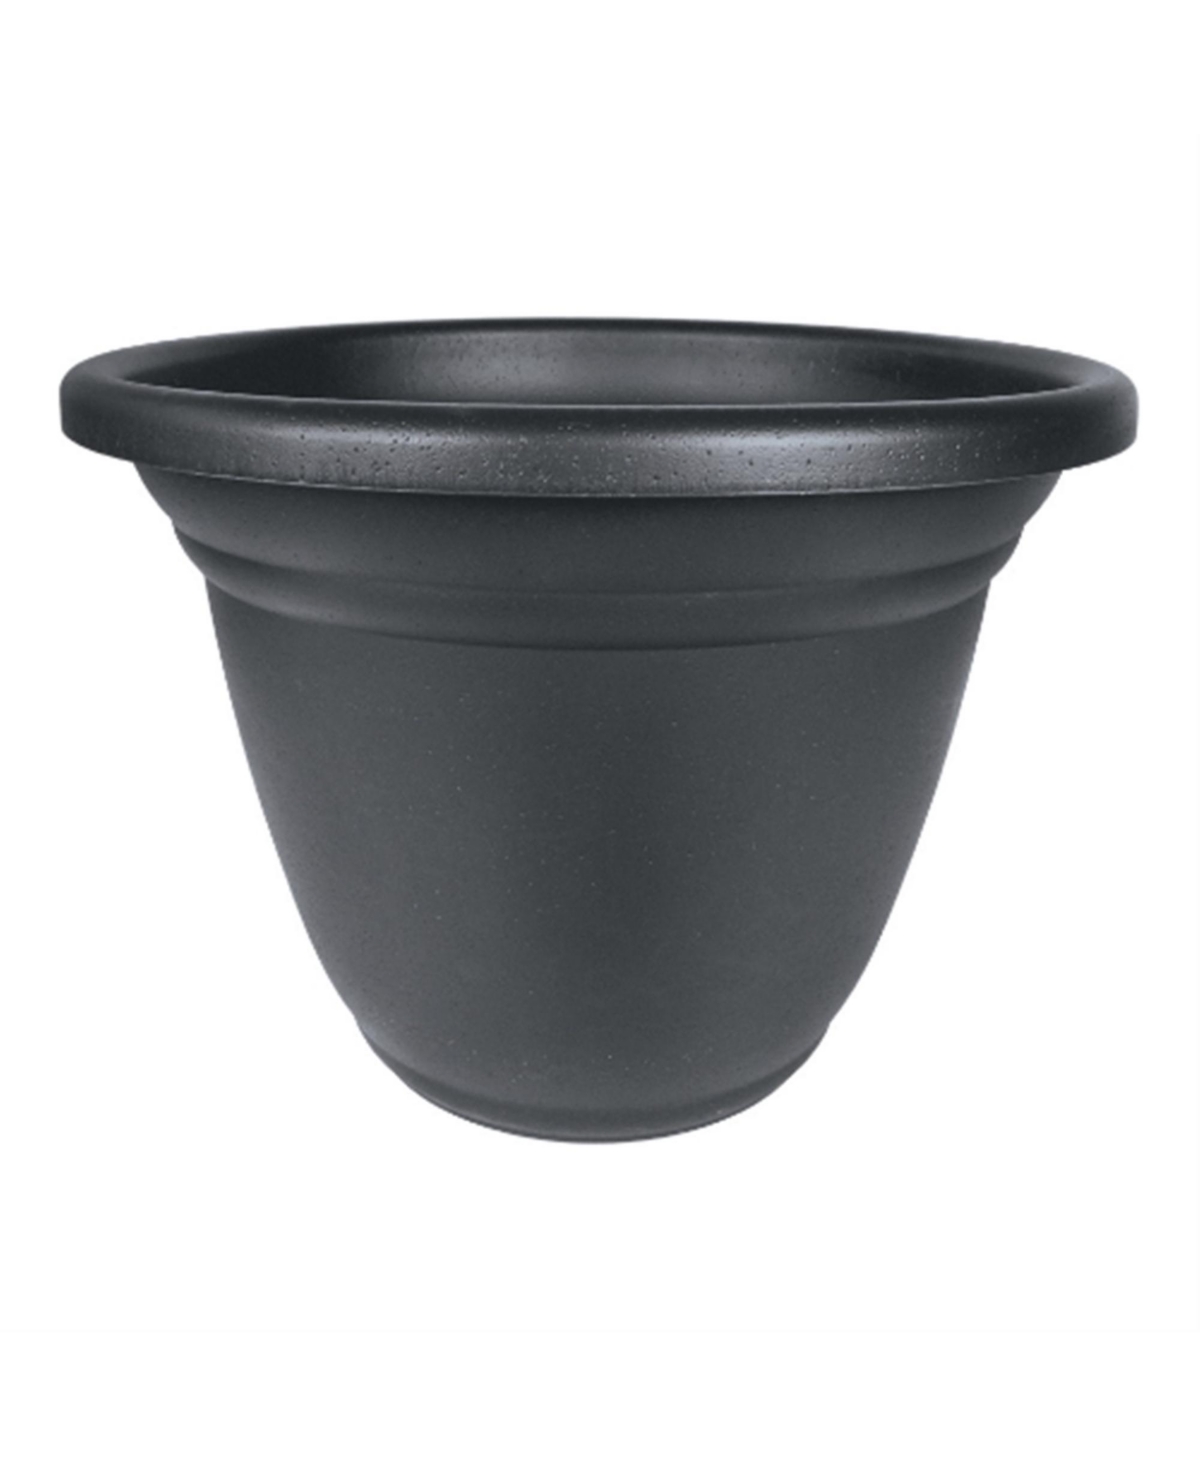 Hc Companies Plastic In Outdoor Round Mojave Planter Grey - 22 Inch - Gray